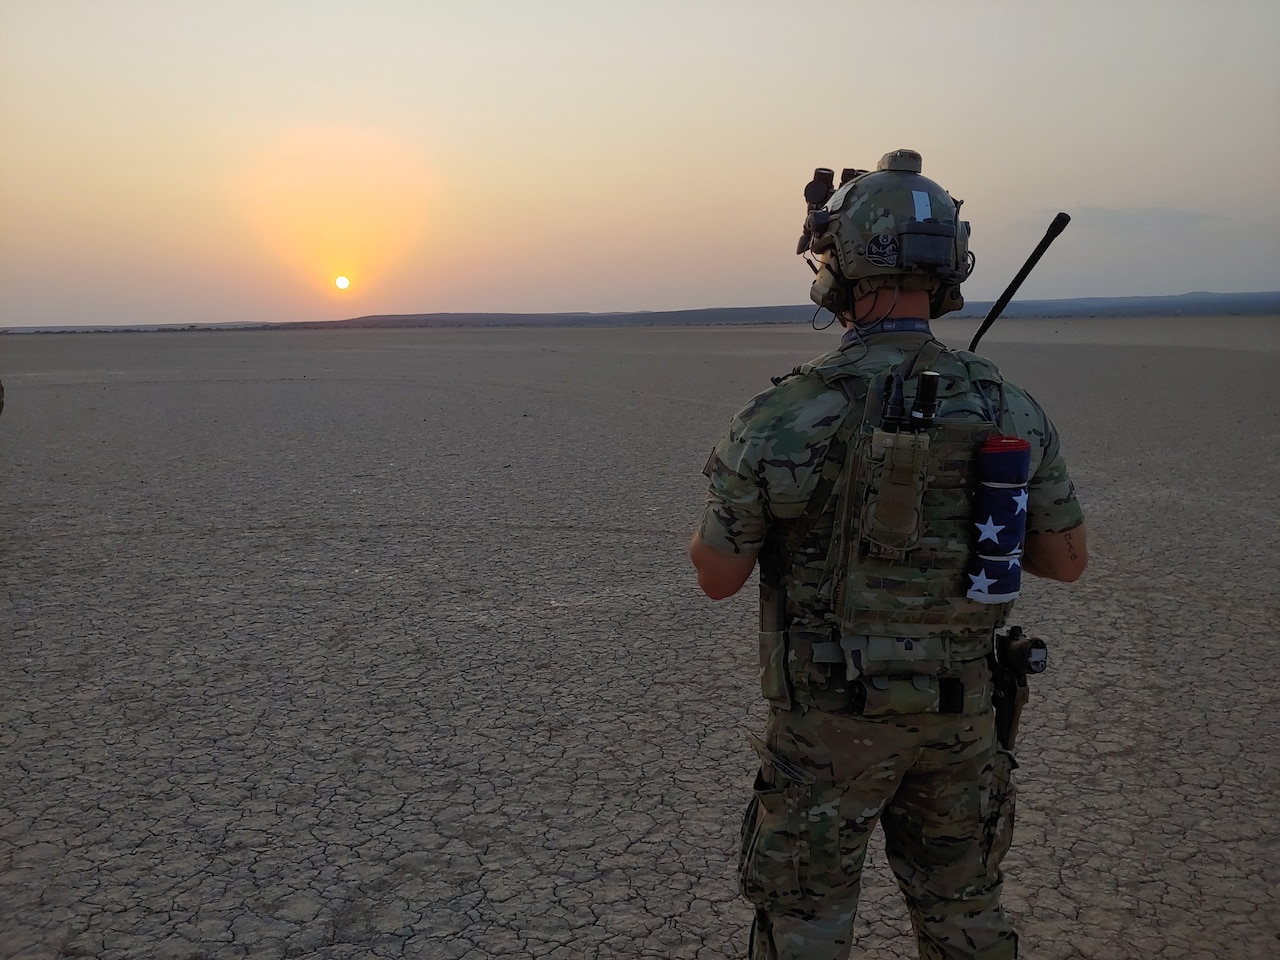 A man is seen from behind staring toward the sunset; in front of him, the ground is dry and cracked.